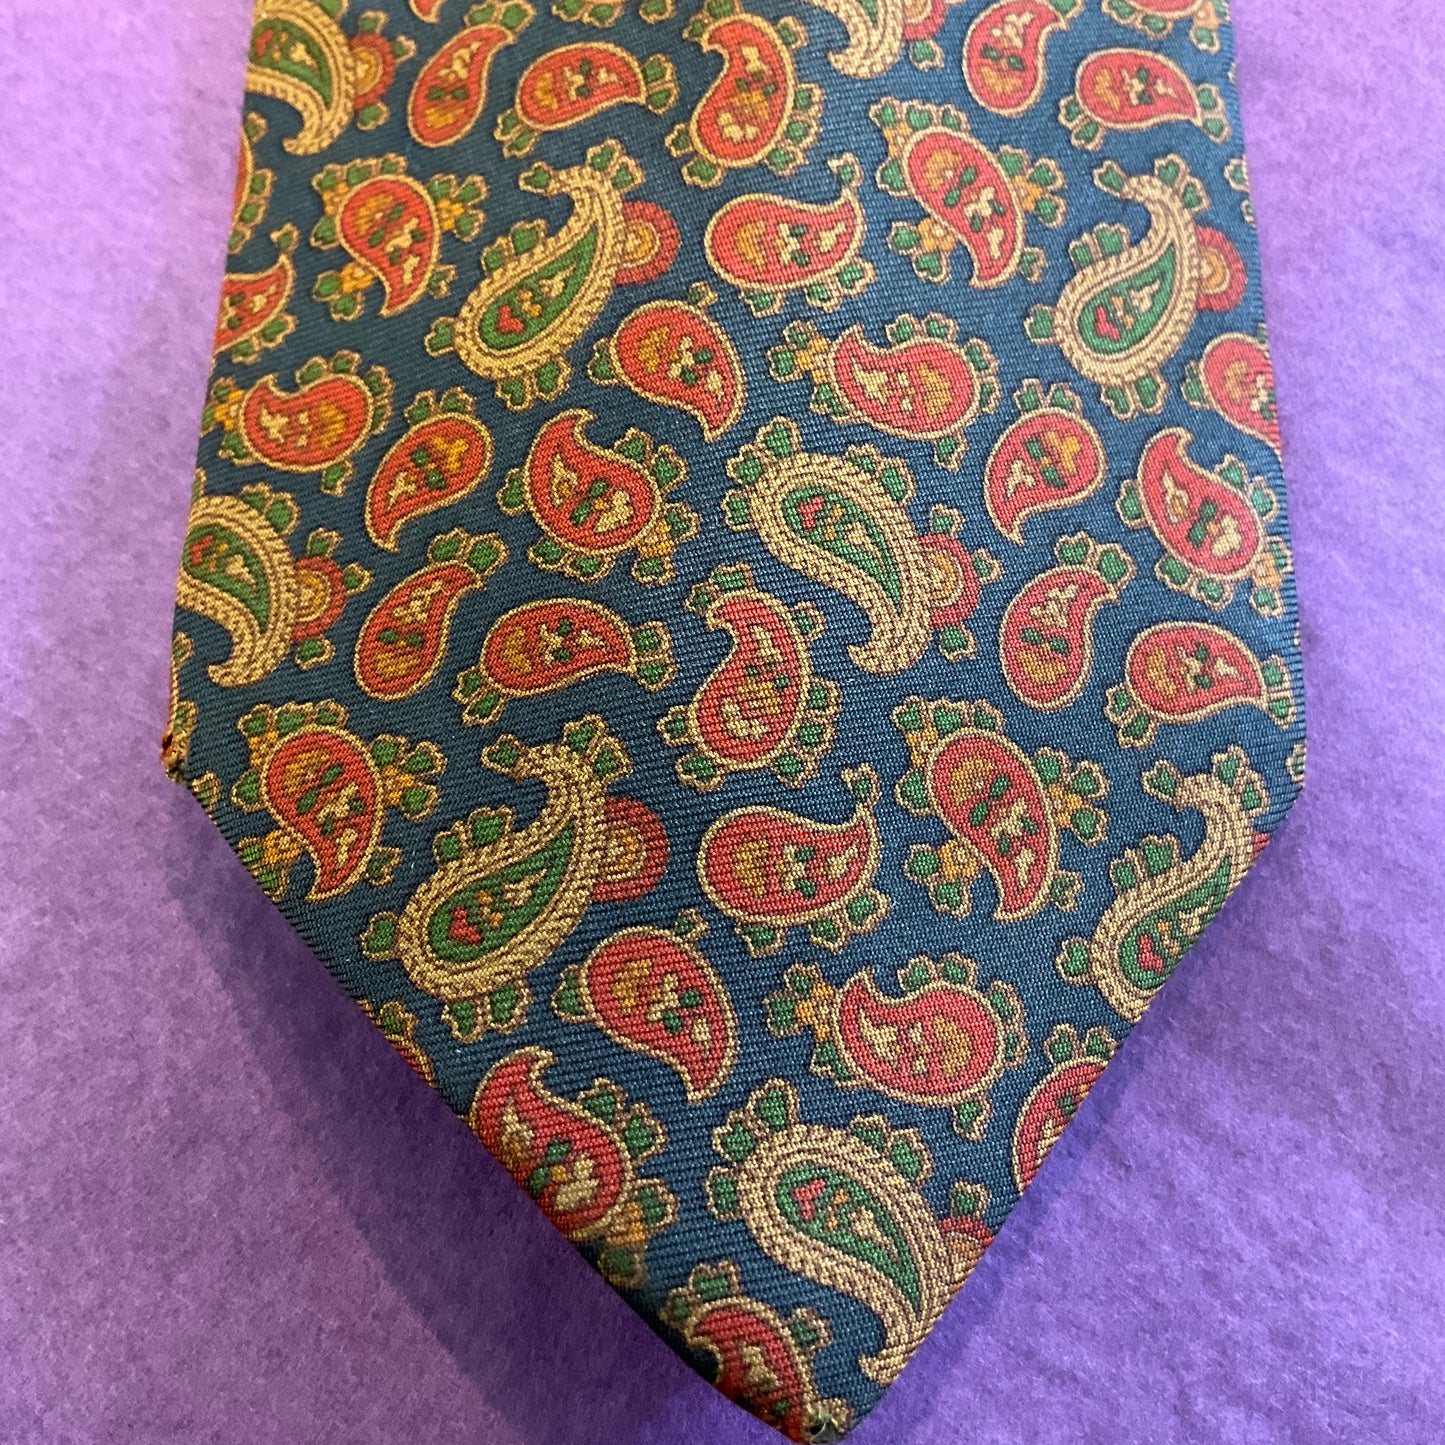 Vintage 1970/80s Liberty of London Red and Blue Paisley All silk Tie, gift for him, fathers day